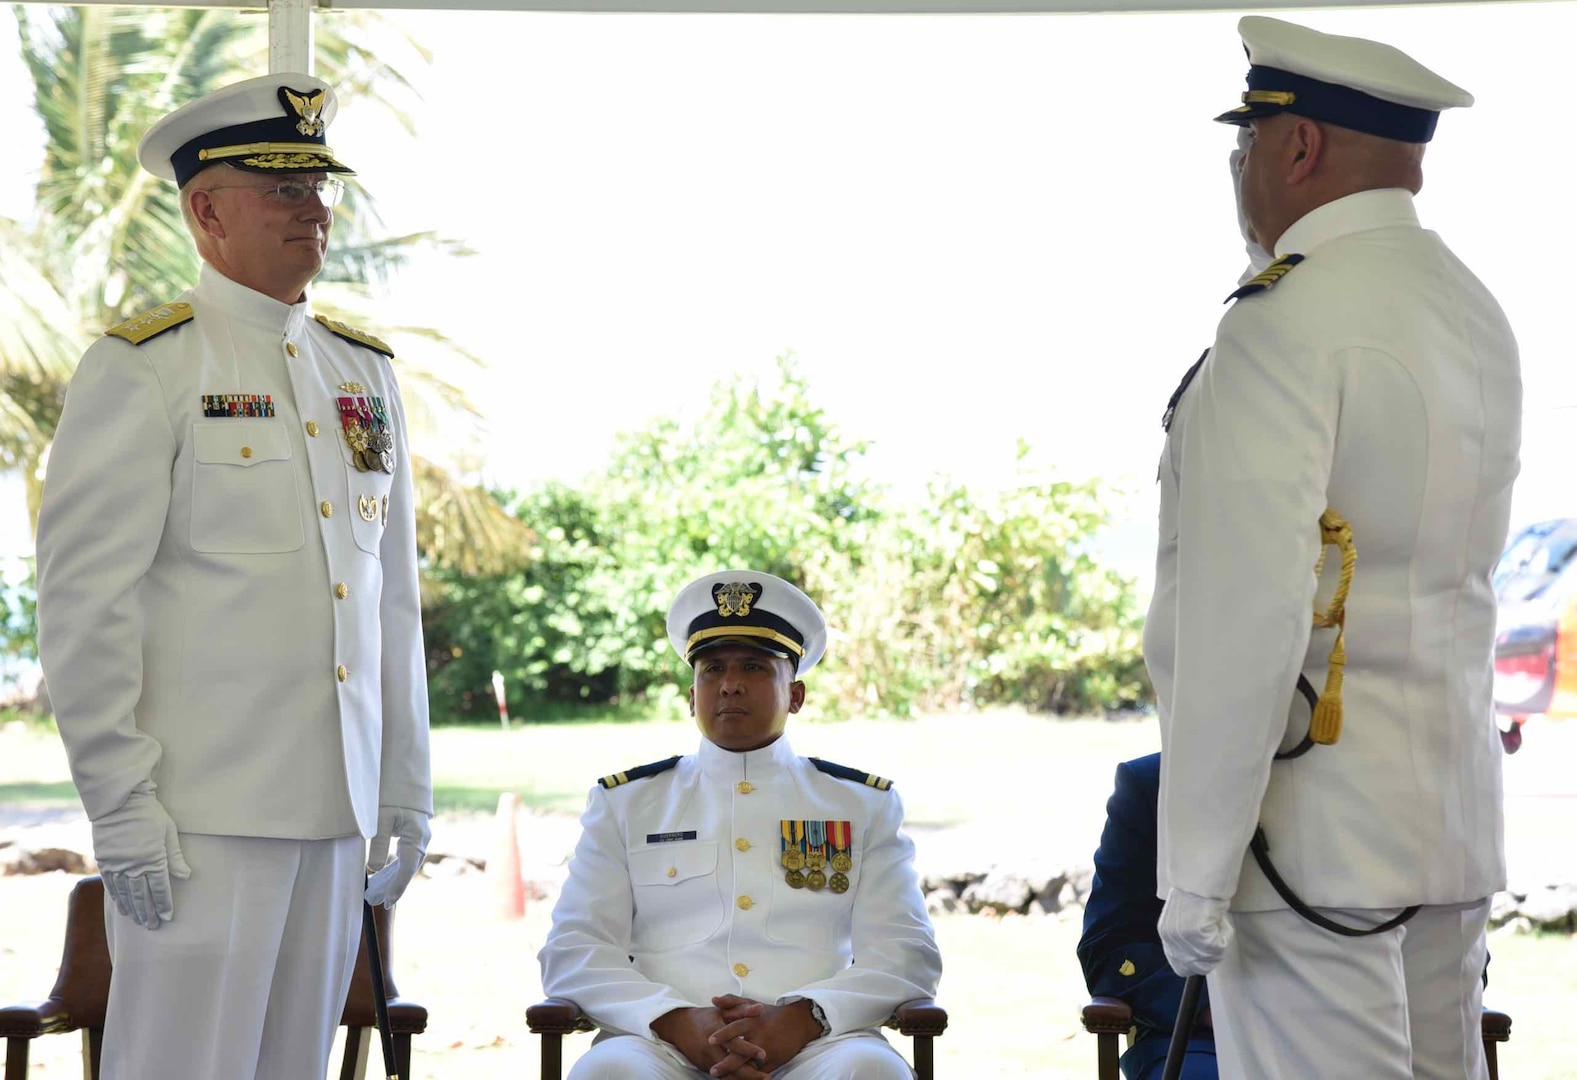 Rear Adm. Douglas M. Schofield (left) and Capt. José E. Díaz (right) during the transfer command authority at the Sector San Juan Change of Command Ceremony in San Juan, Puerto Rico June 13, 2024. During the ceremony, Capt. Luis J. Rodríguez relieved Capt. Díaz as the commander of Sector San Juan. Capt. Rodríguez will be responsible for leading Coast Guard forces in Puerto Rico and the U.S. Virgin Islands and the oversight of a 1.3 million square nautical mile area of responsibility in the Eastern Caribbean. (Coast Guard photo by Ricardo Castrodad)